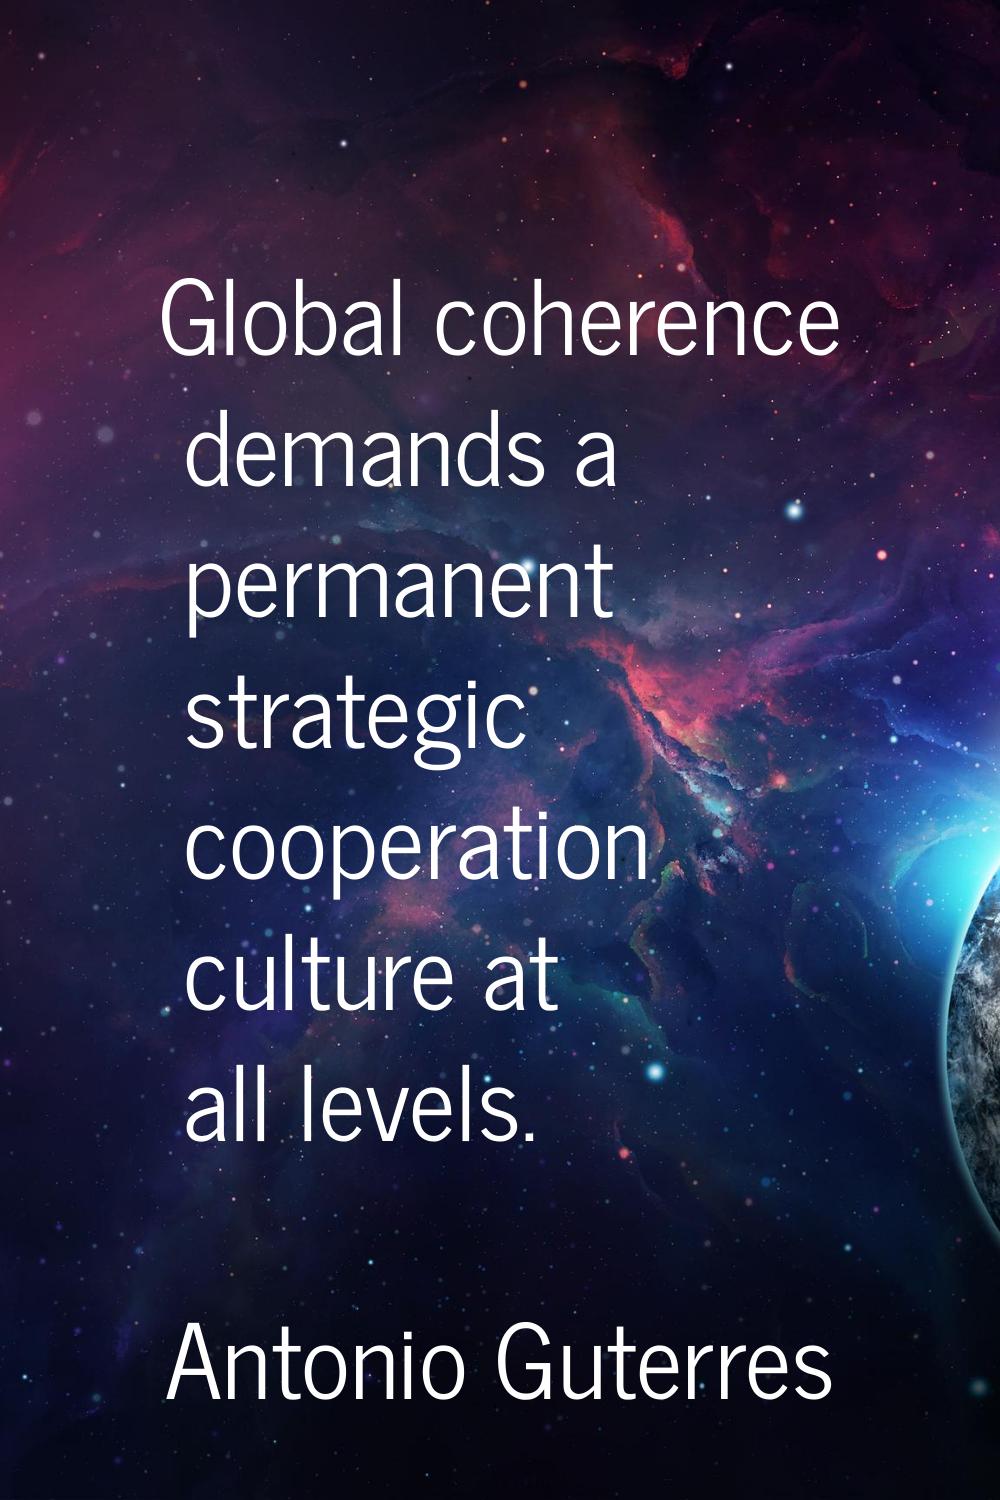 Global coherence demands a permanent strategic cooperation culture at all levels.